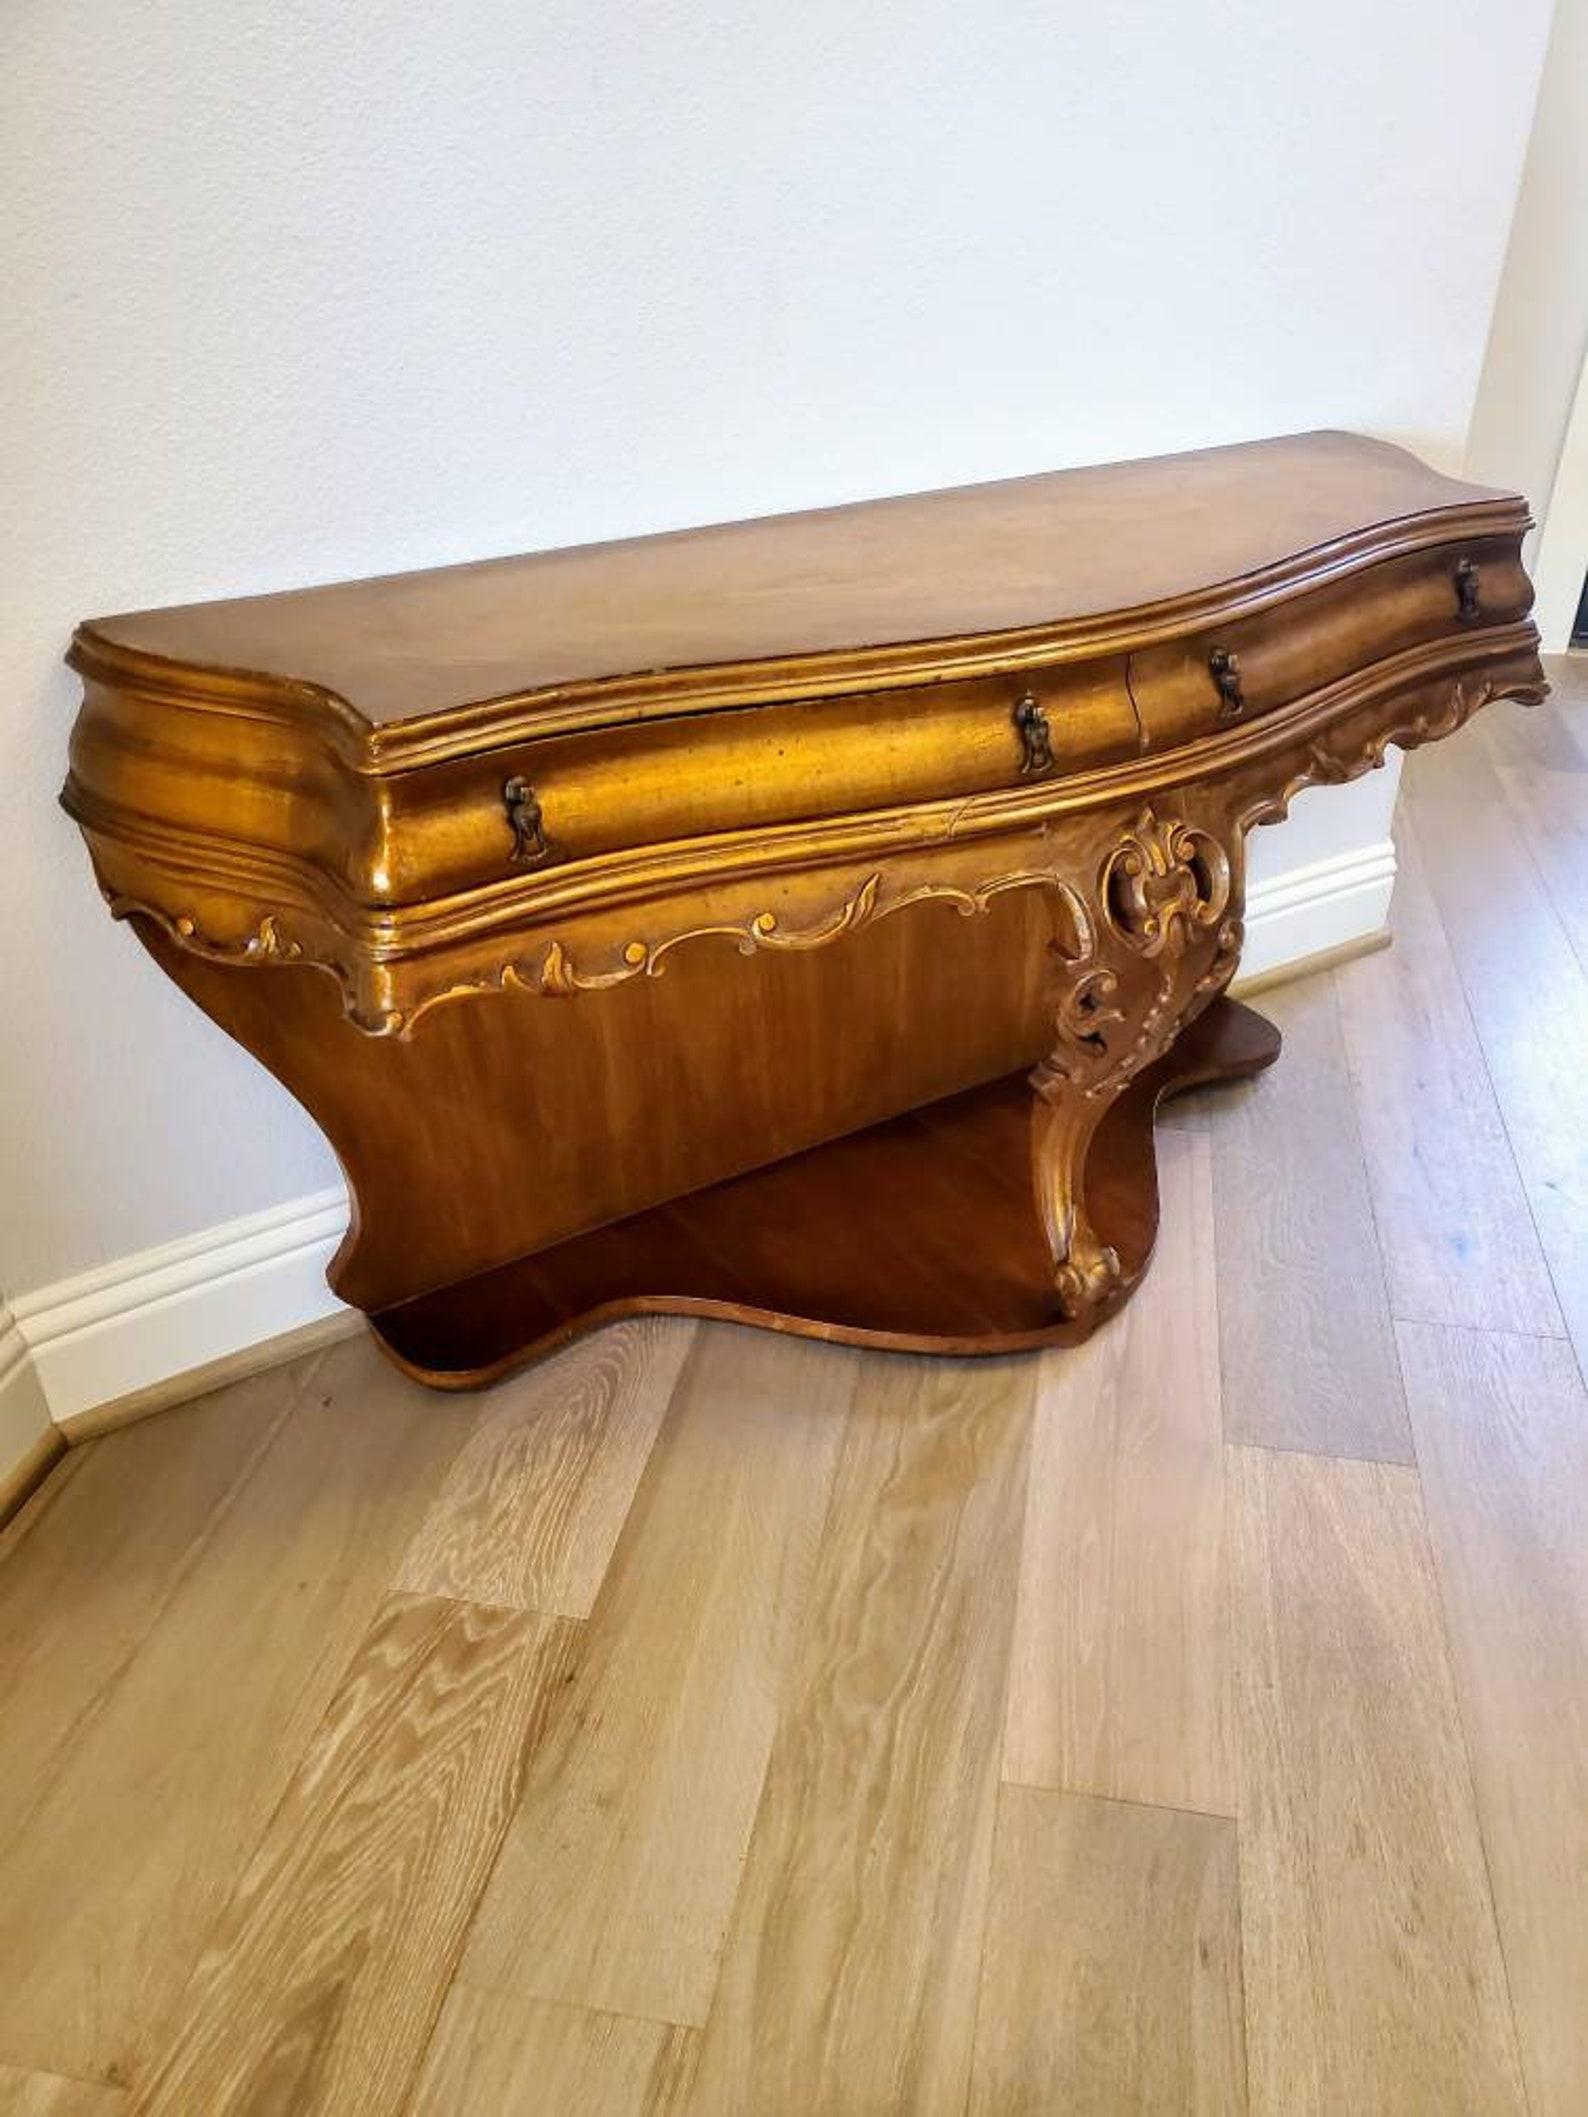 A rare and a little unusual carved gilt wood console table from the early 20th century.

Hand-crafted in Italy, solid wood construction, distressed painted gold lacquered gilded bronze finish, unique shapely bombe form, having a serpentine shaped